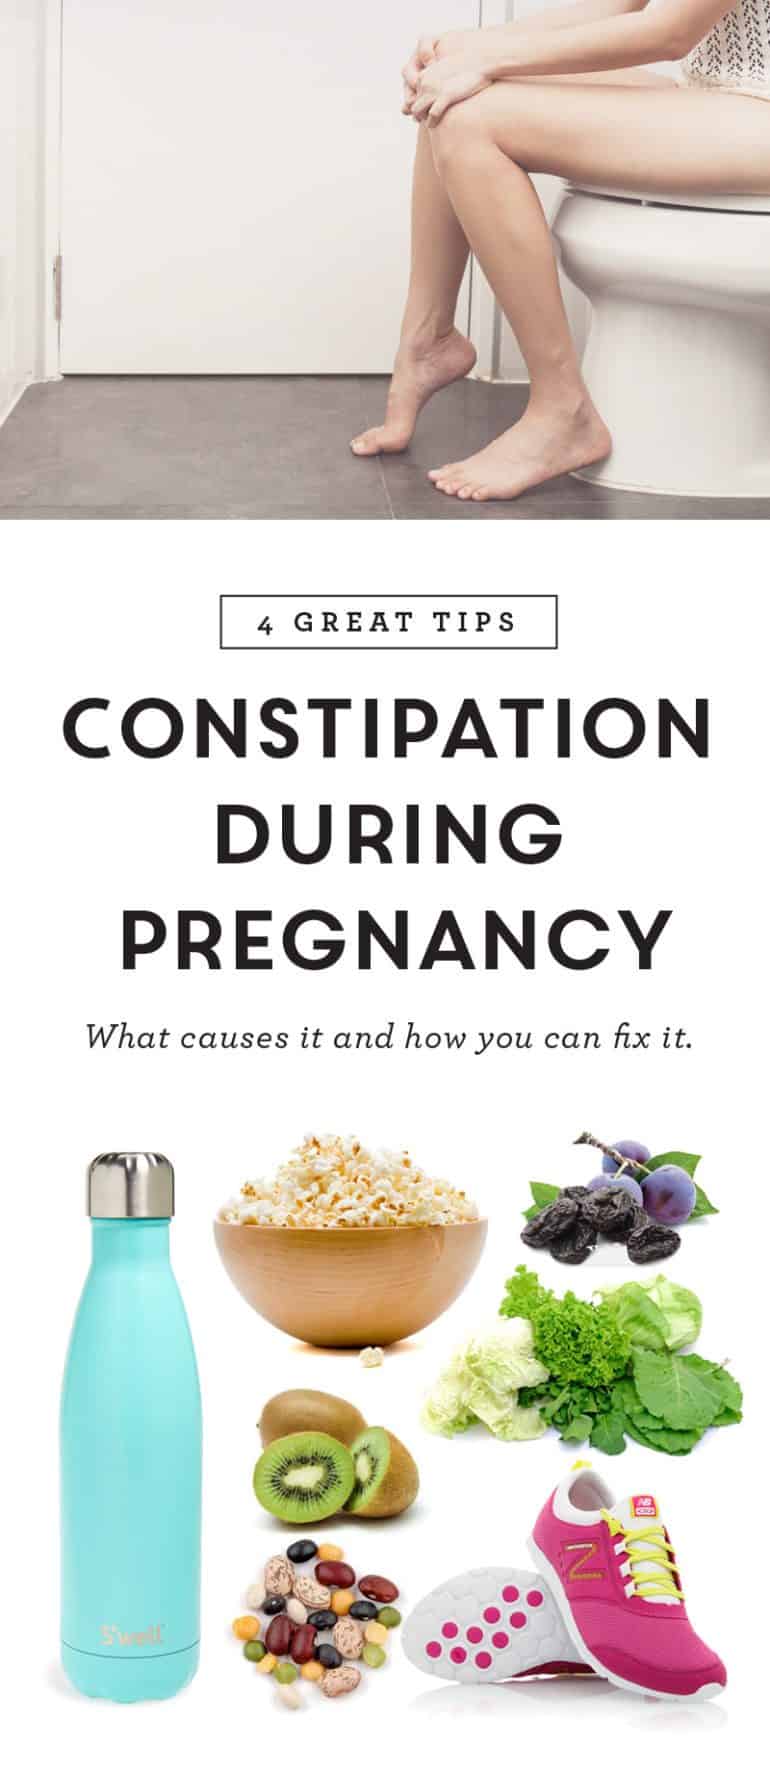 Tips on how to remedy pregnancy constipation.